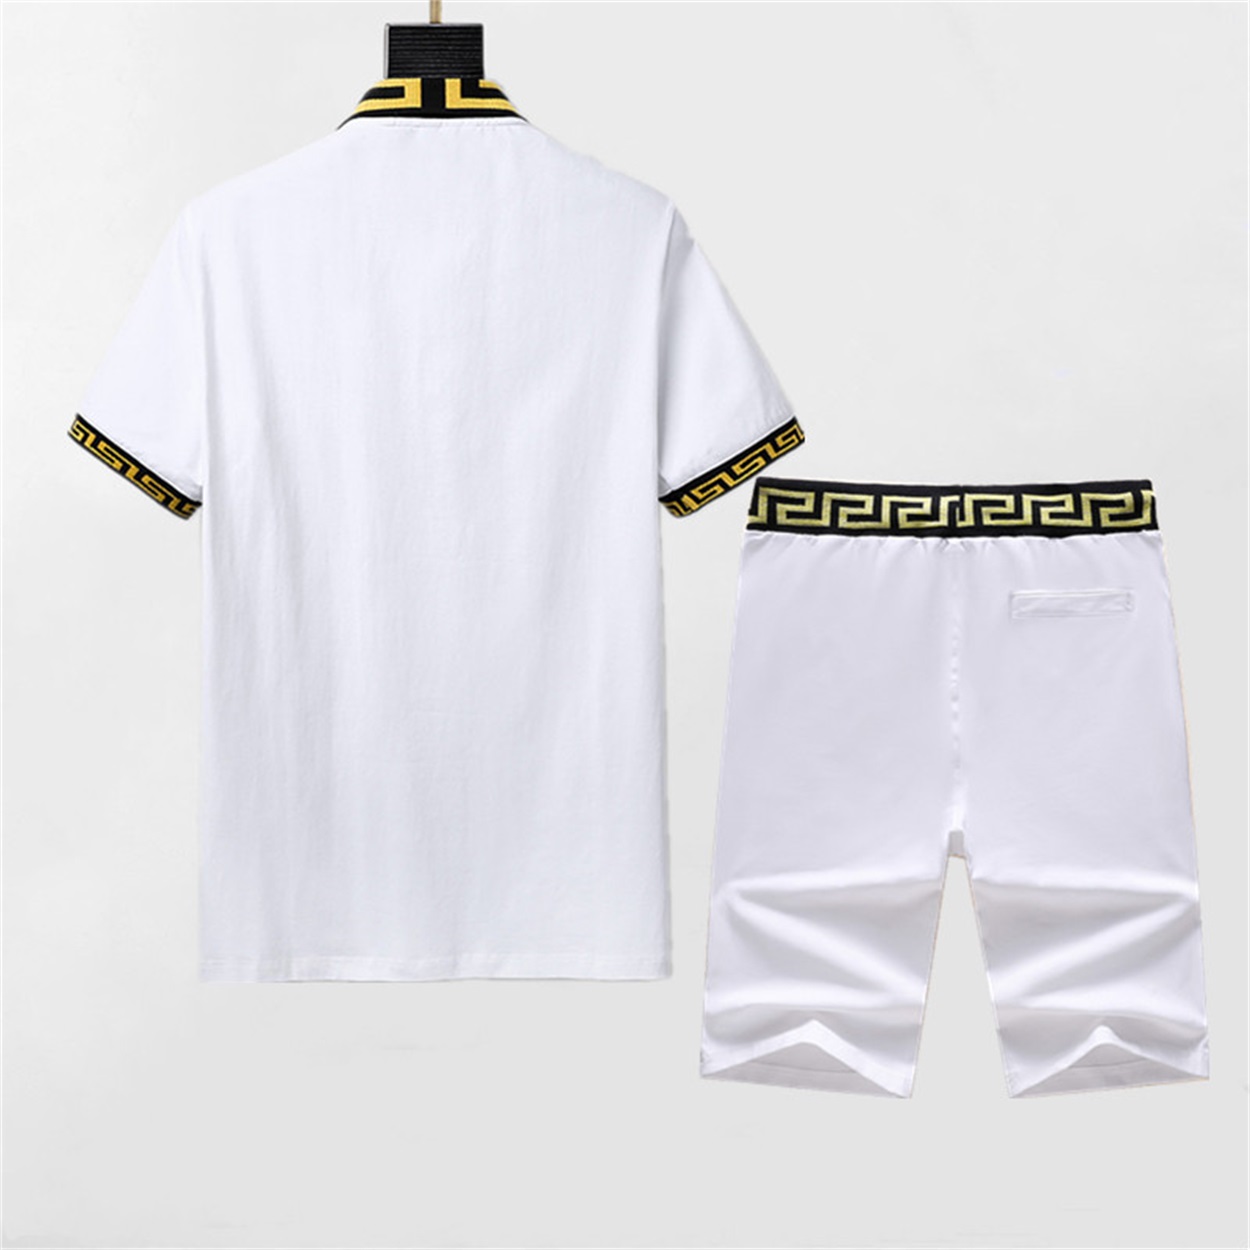 

Mens Beach Designers Tracksuits Summer Suits 21ss Fashion T Shirt Seaside Holiday Shirts Shorts Sets Man S 2021 Luxury Set Outfits Sportswears A-03, Customize